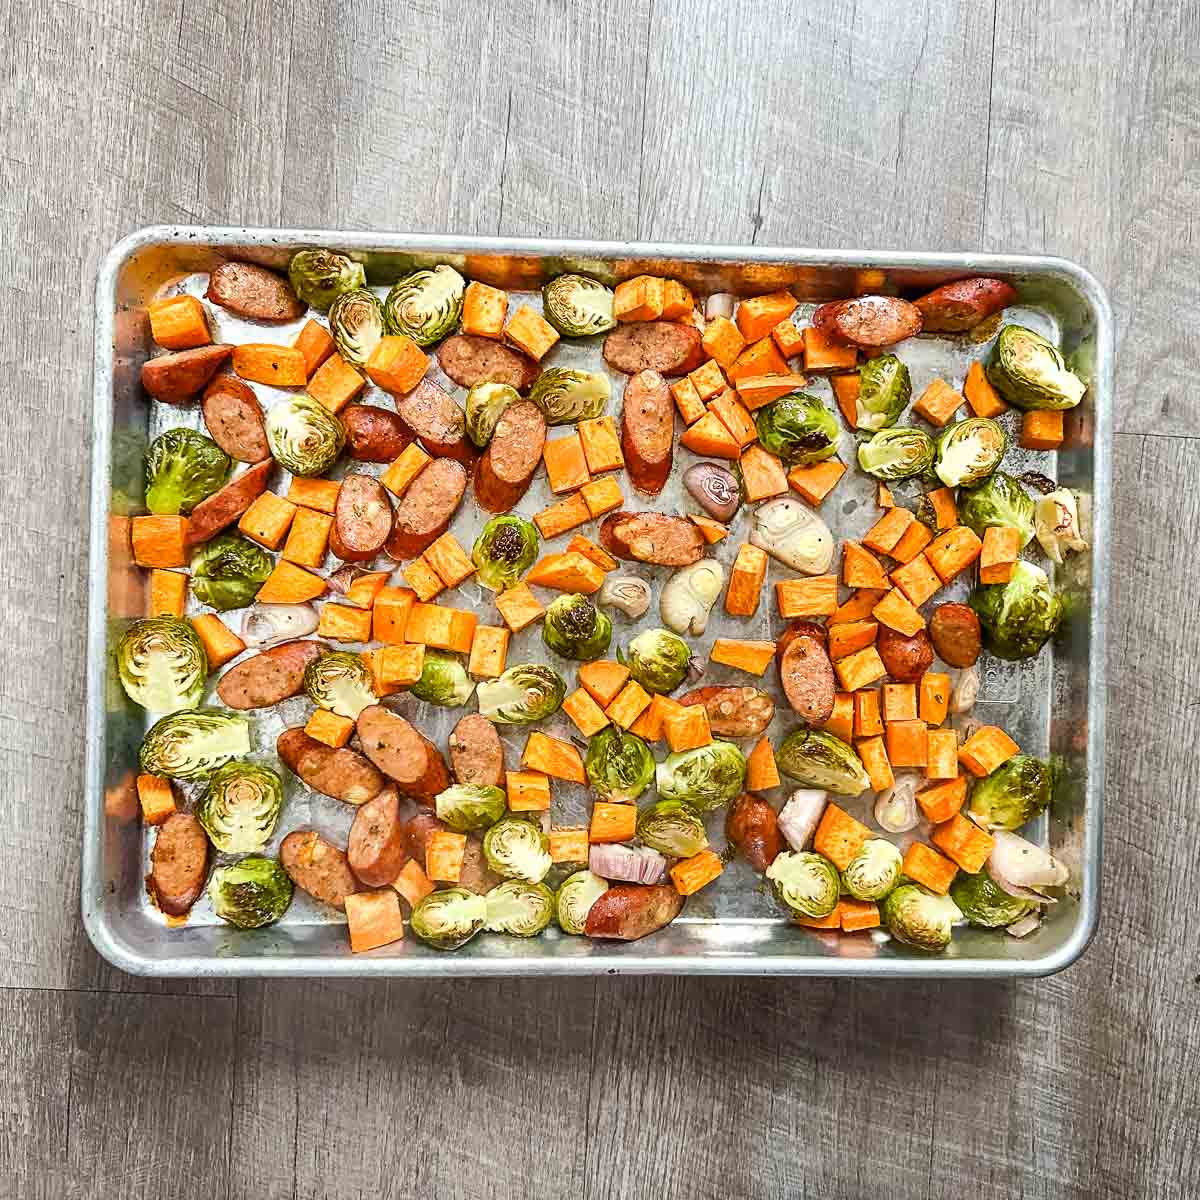 The completed harvest sheet pan dinner is shown on a wooden background.